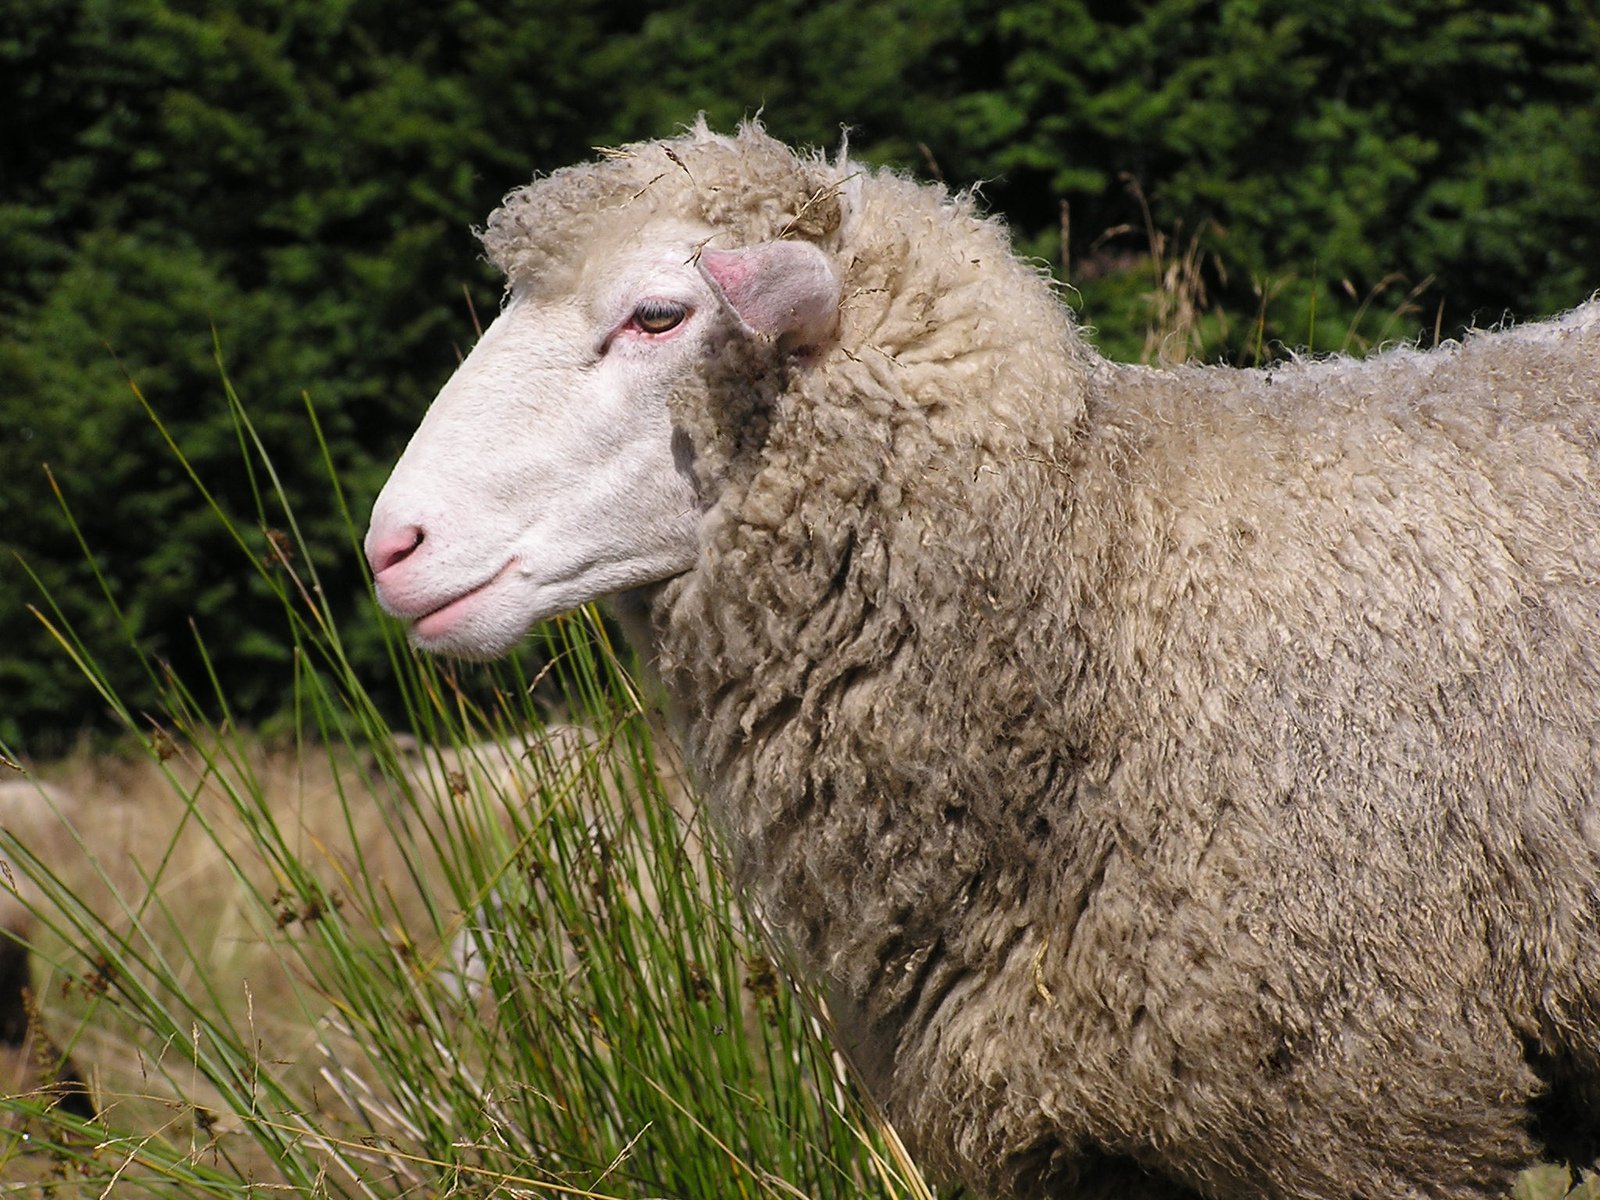 a sheep is standing in a grass field